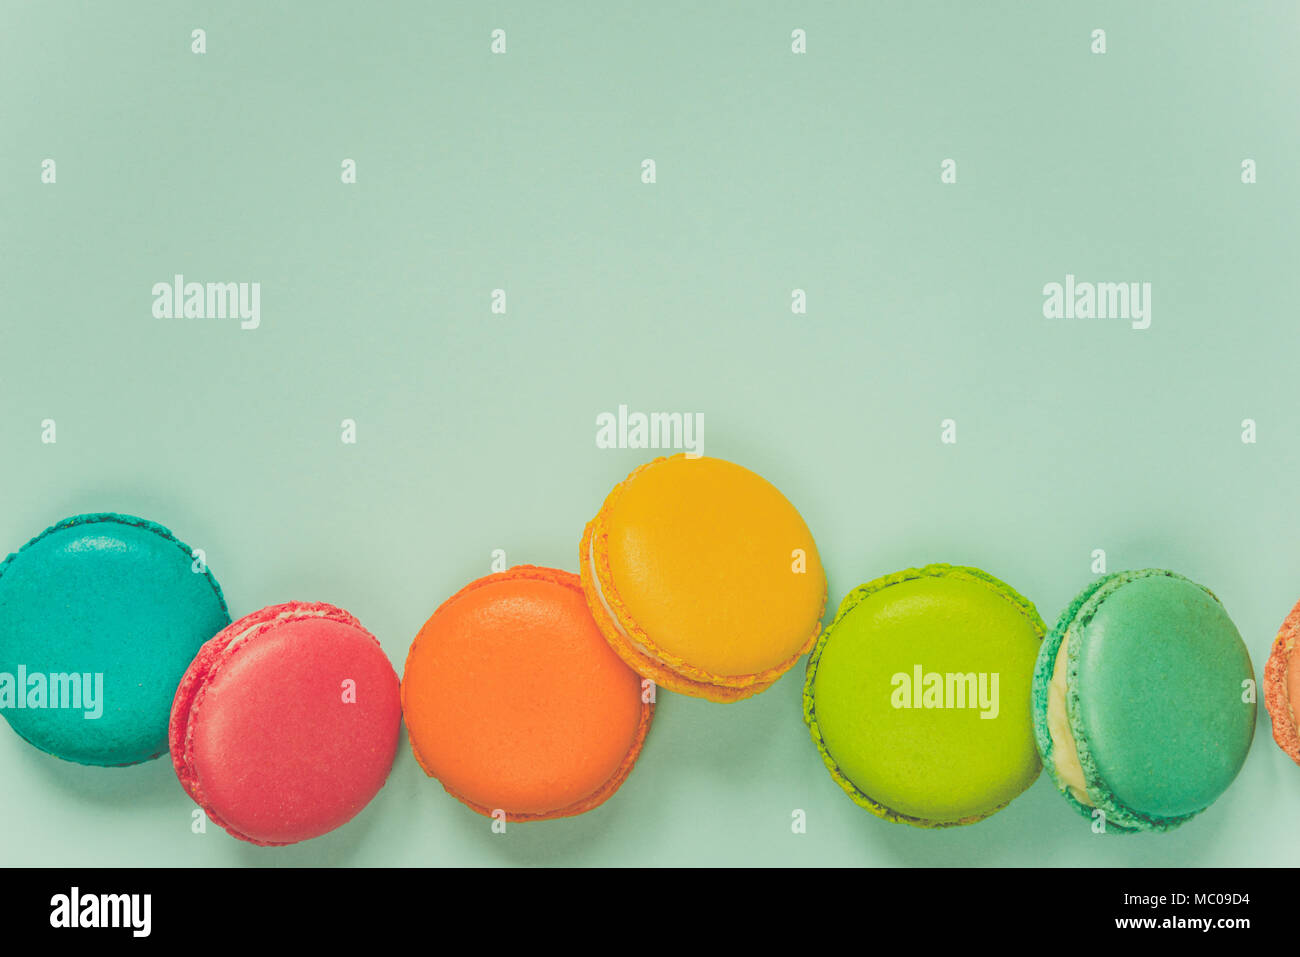 Colorful macaroons arranged over blue background. Copy space. Vintage effect. Stock Photo